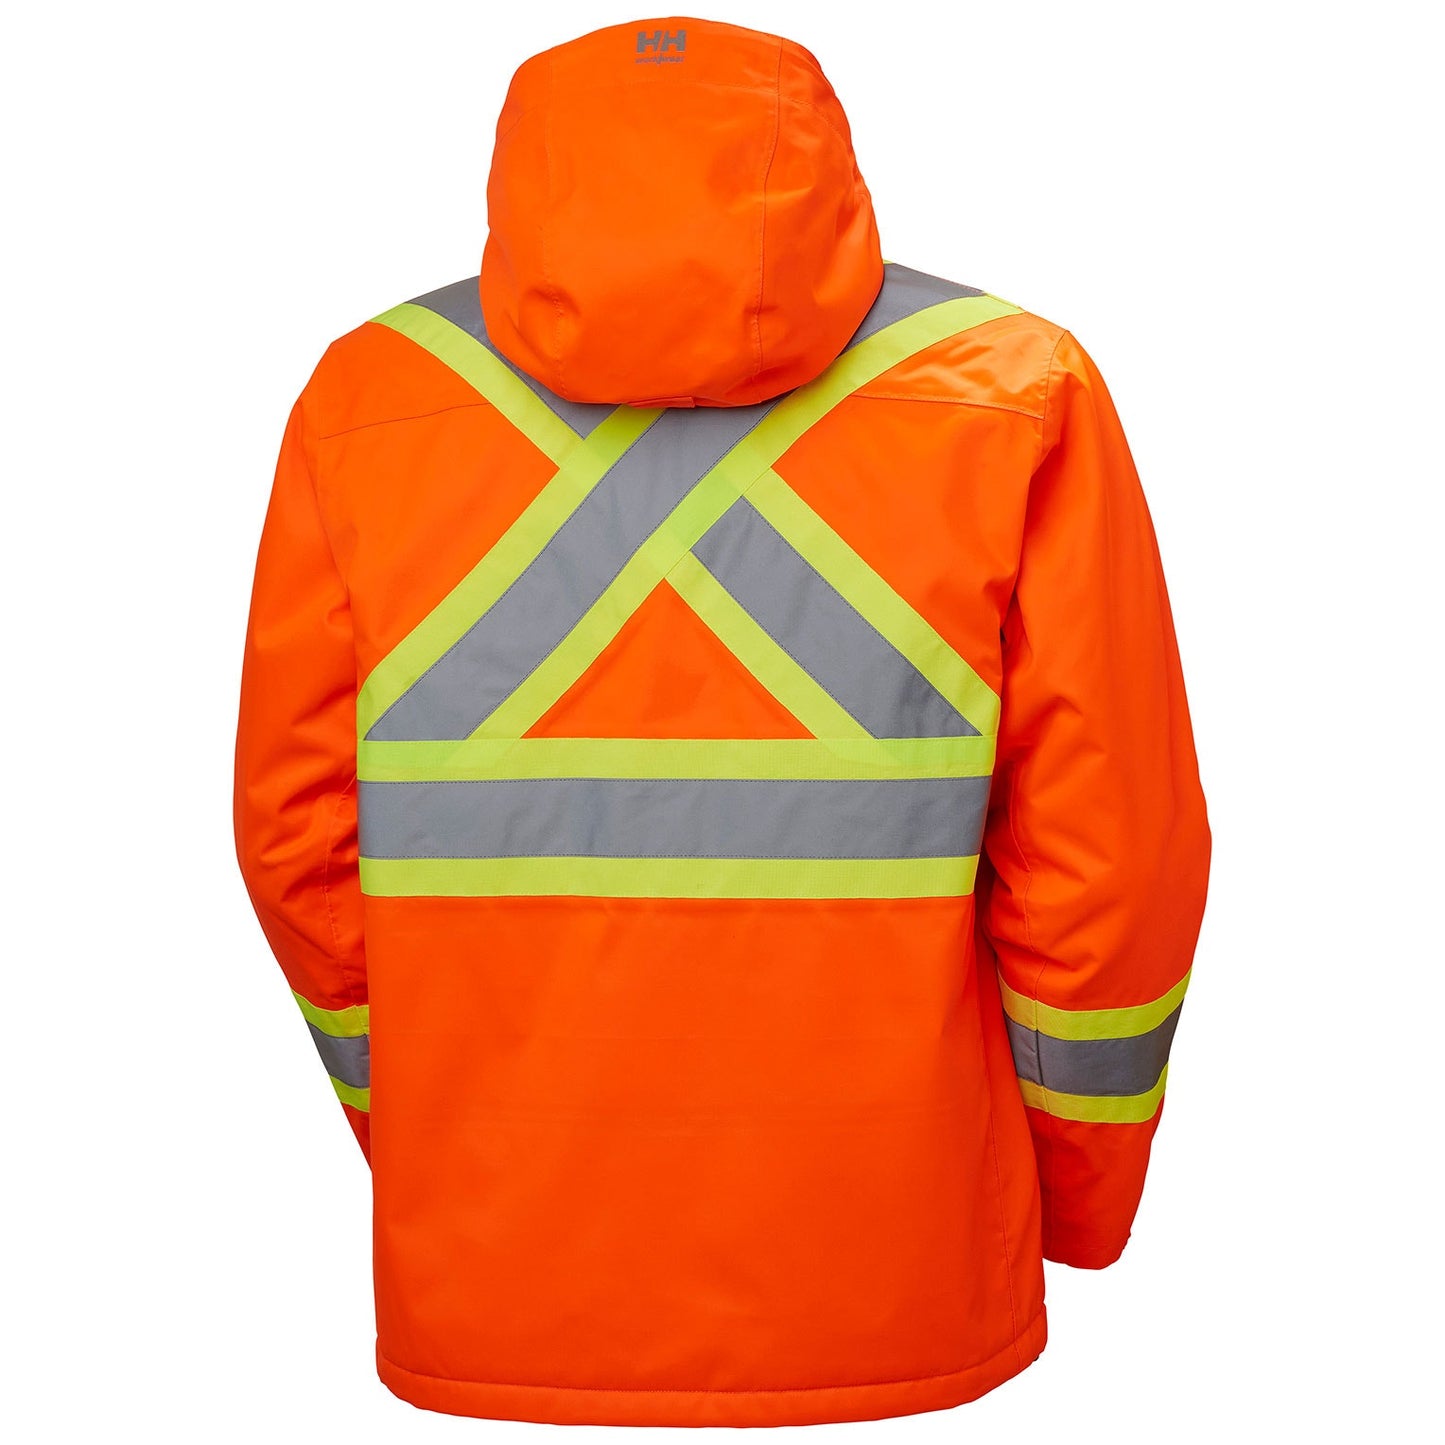 Alta High Visibility Insulated Winter Jacket, CSA